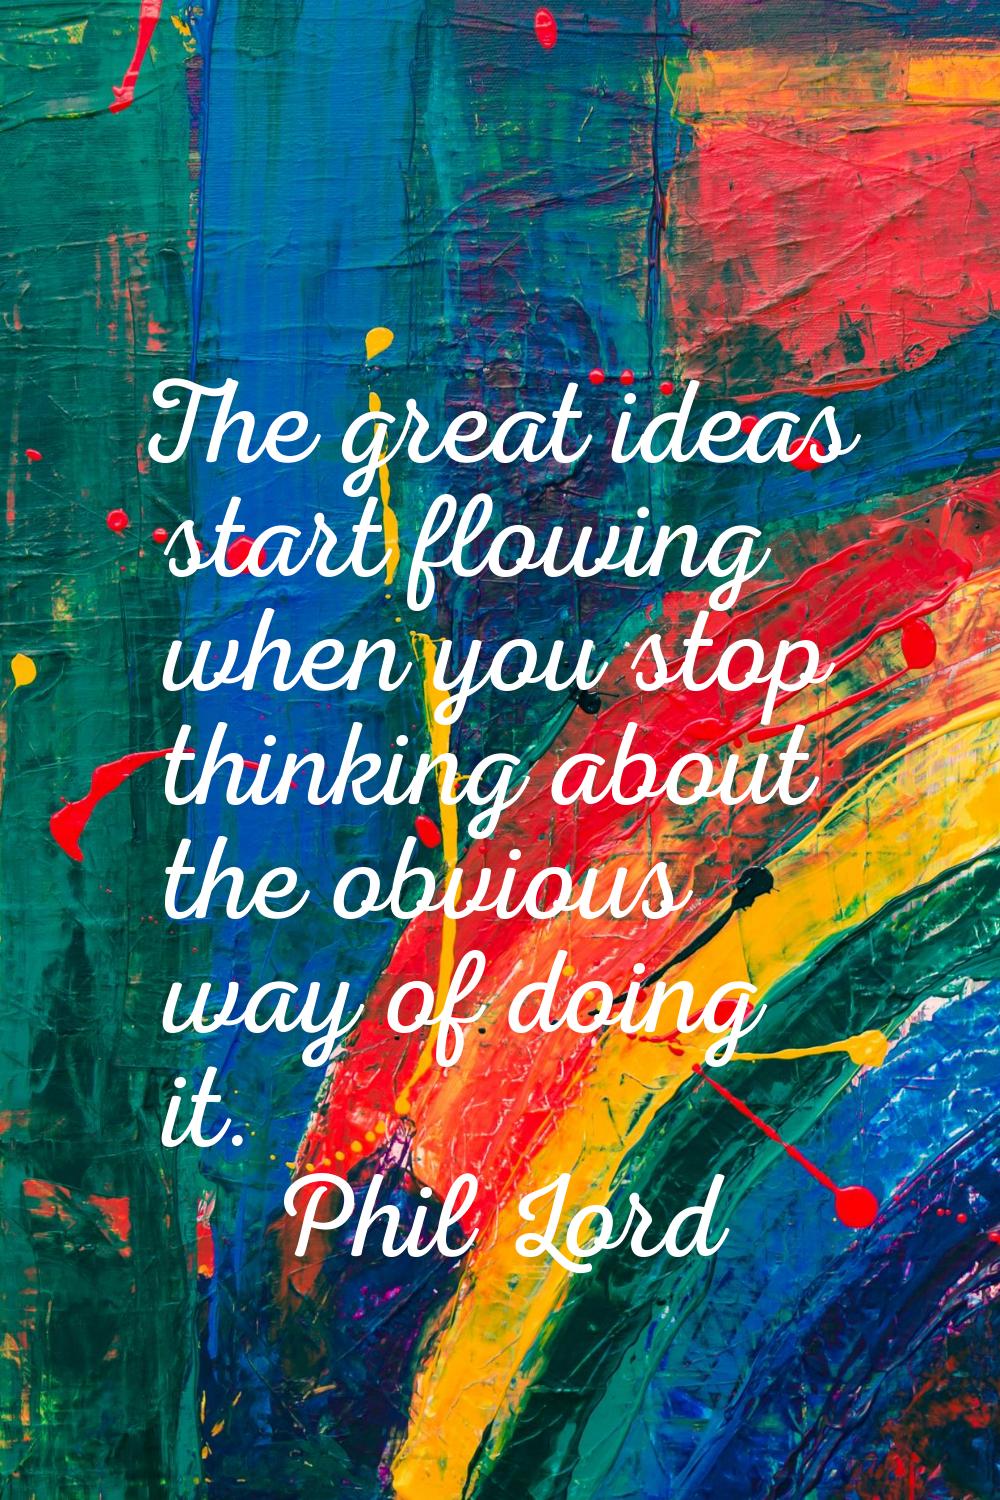 The great ideas start flowing when you stop thinking about the obvious way of doing it.